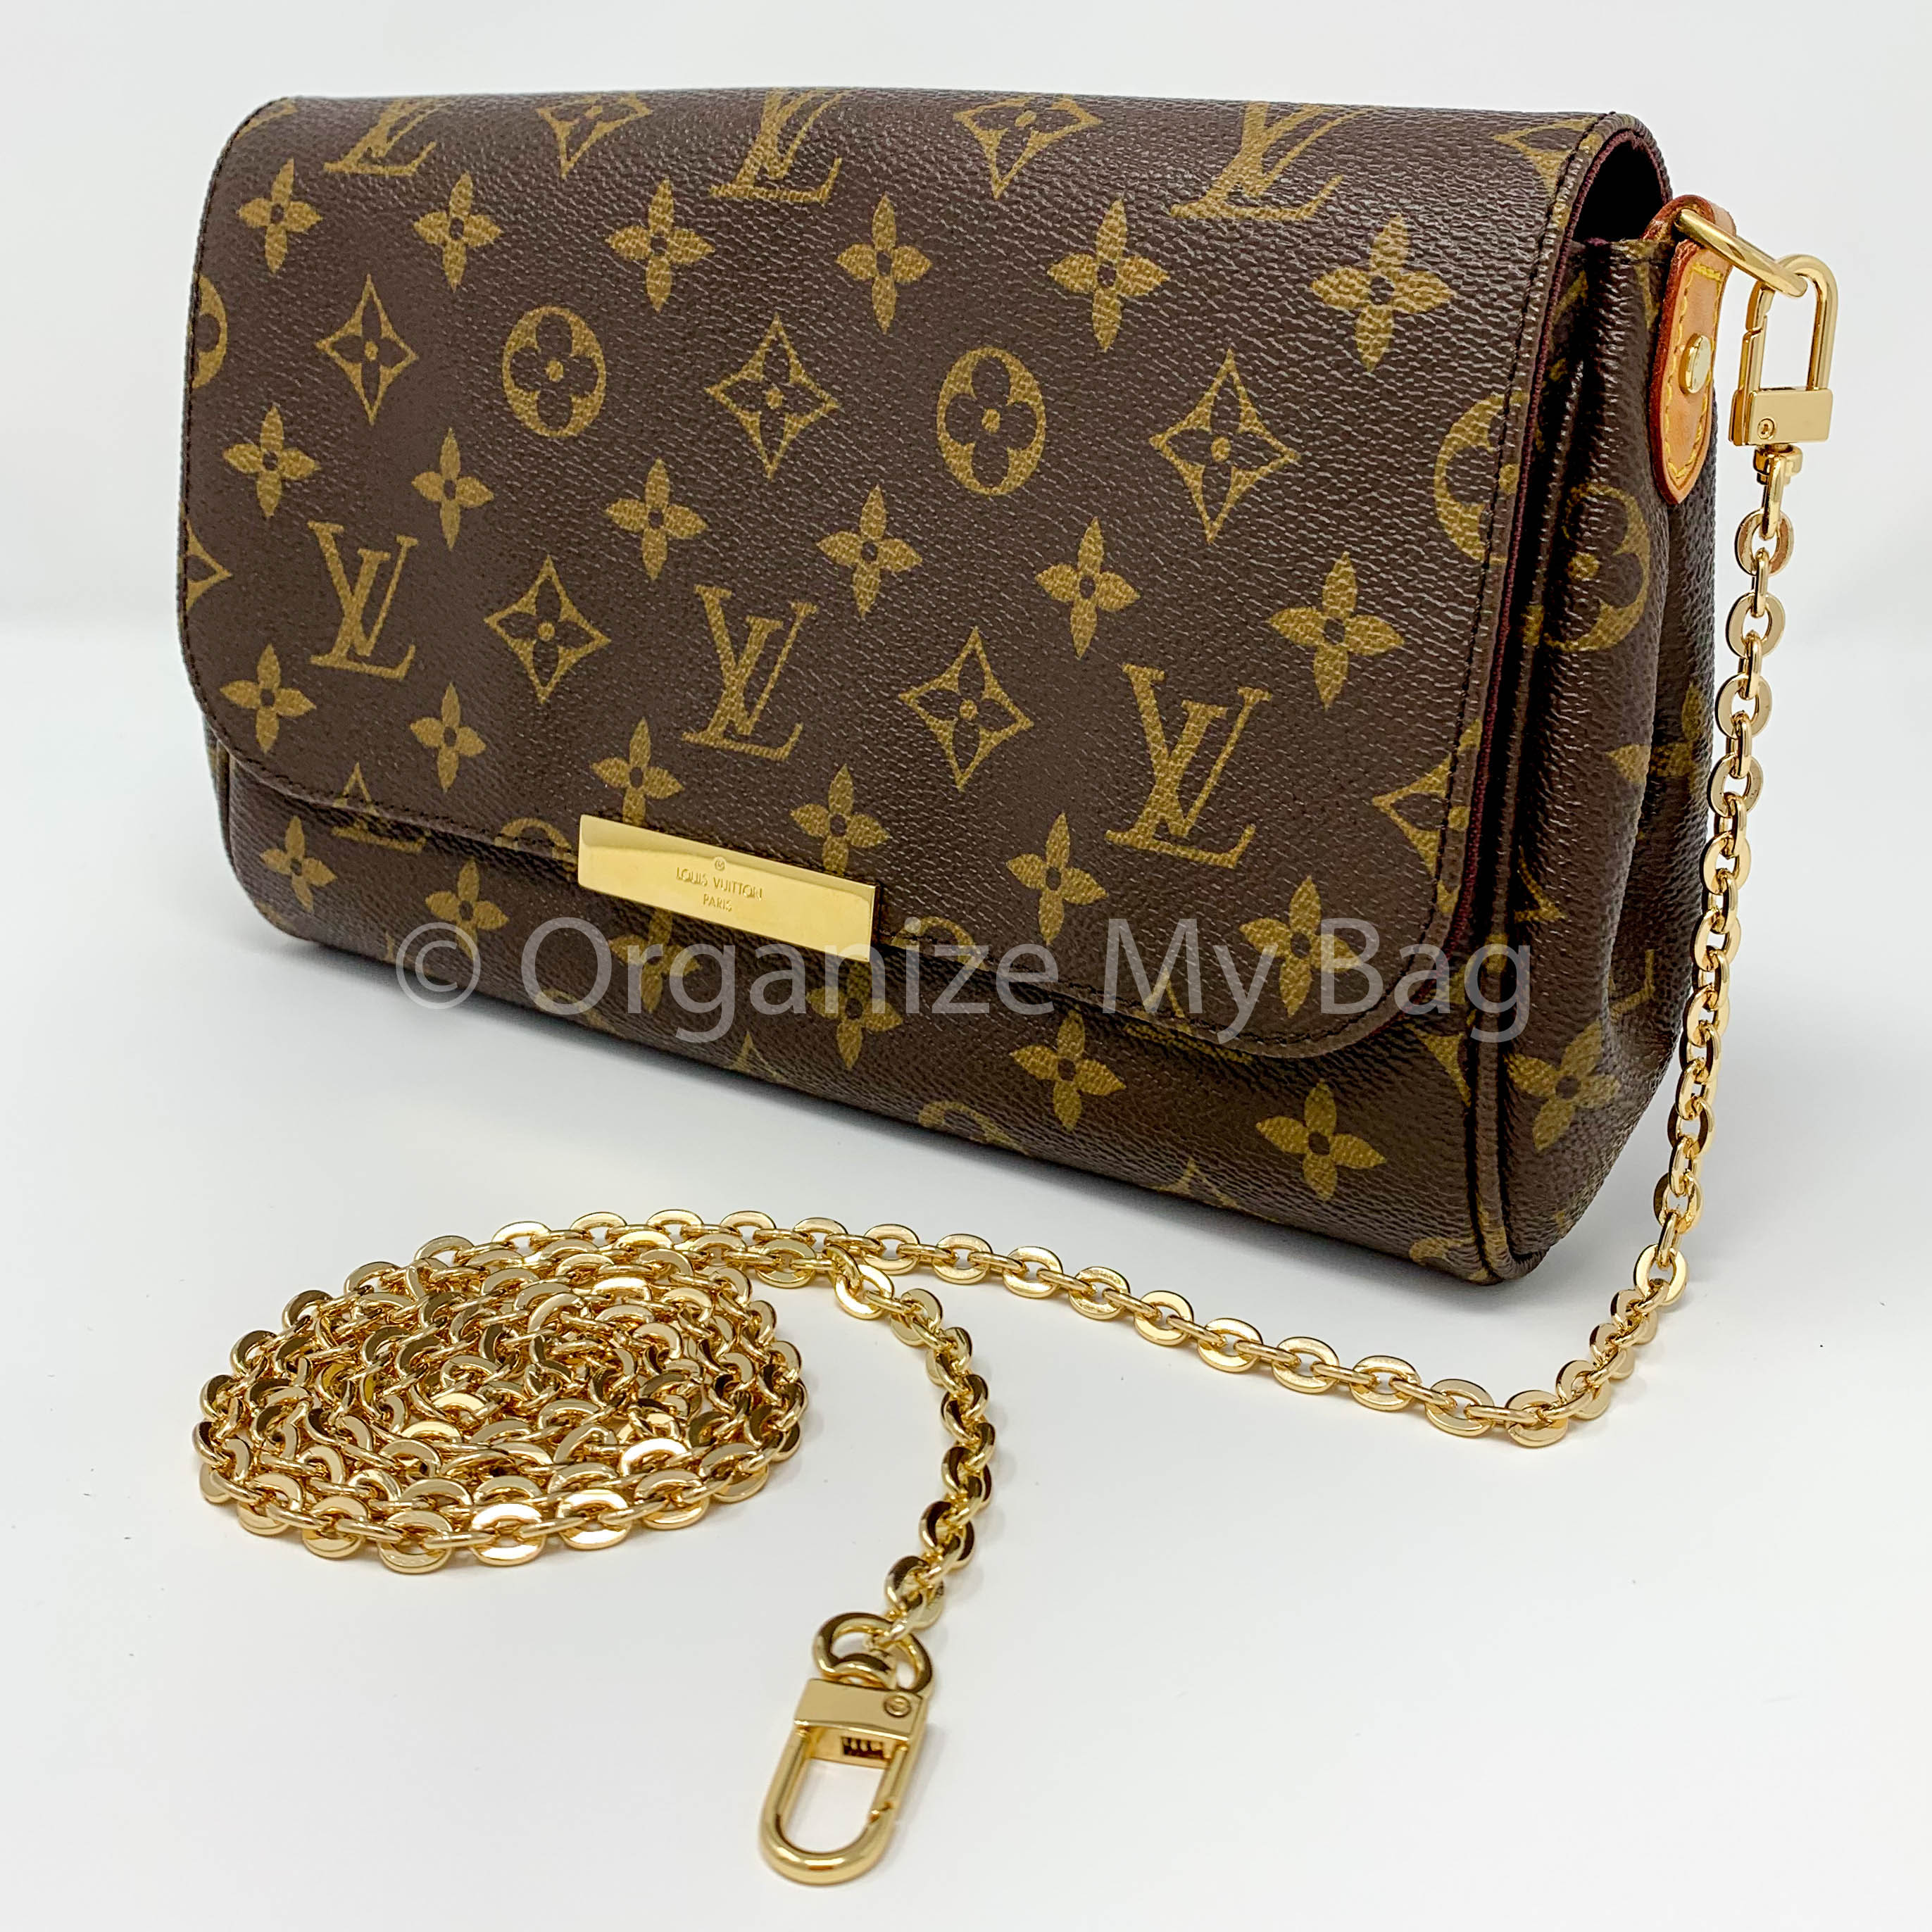 replacement strap for louis vuitton crossbody purse chain